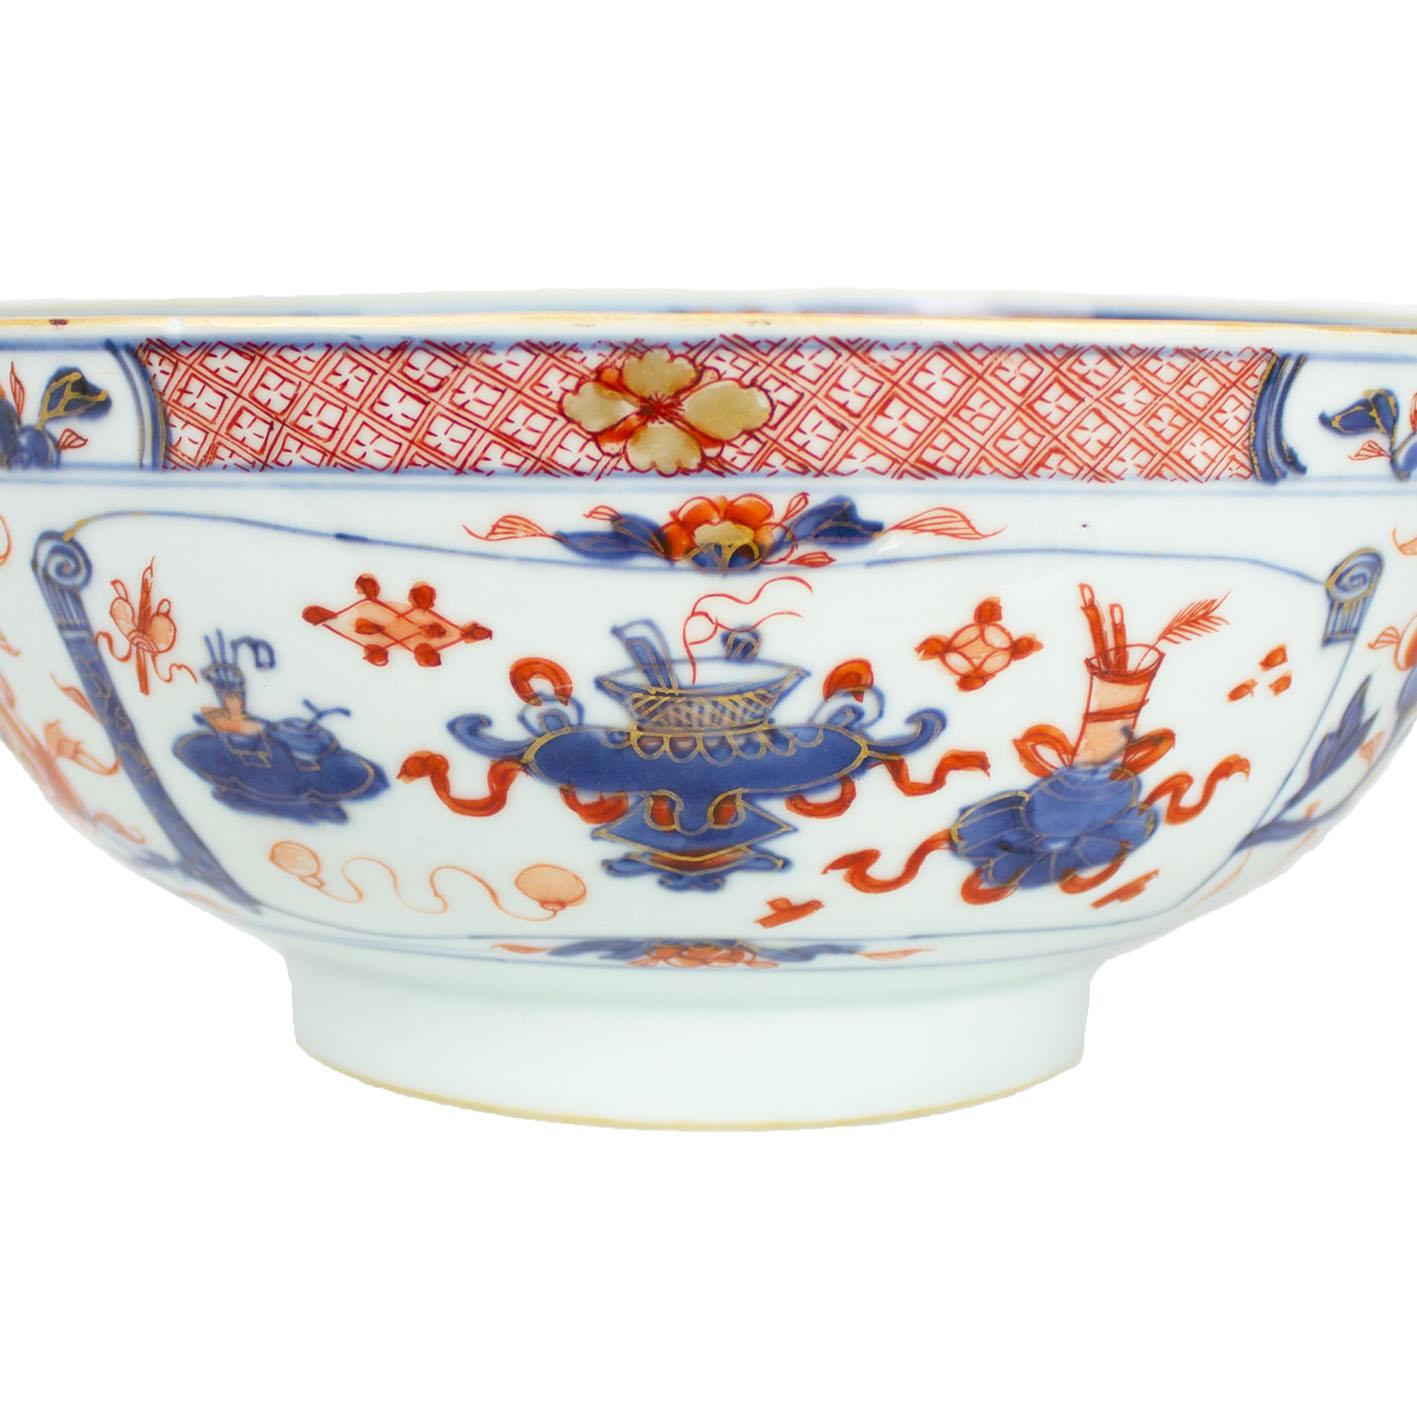 Chinese Export Porcelain Imari Bowl, Qianlong '1736-1795' In Good Condition For Sale In Lisbon, PT